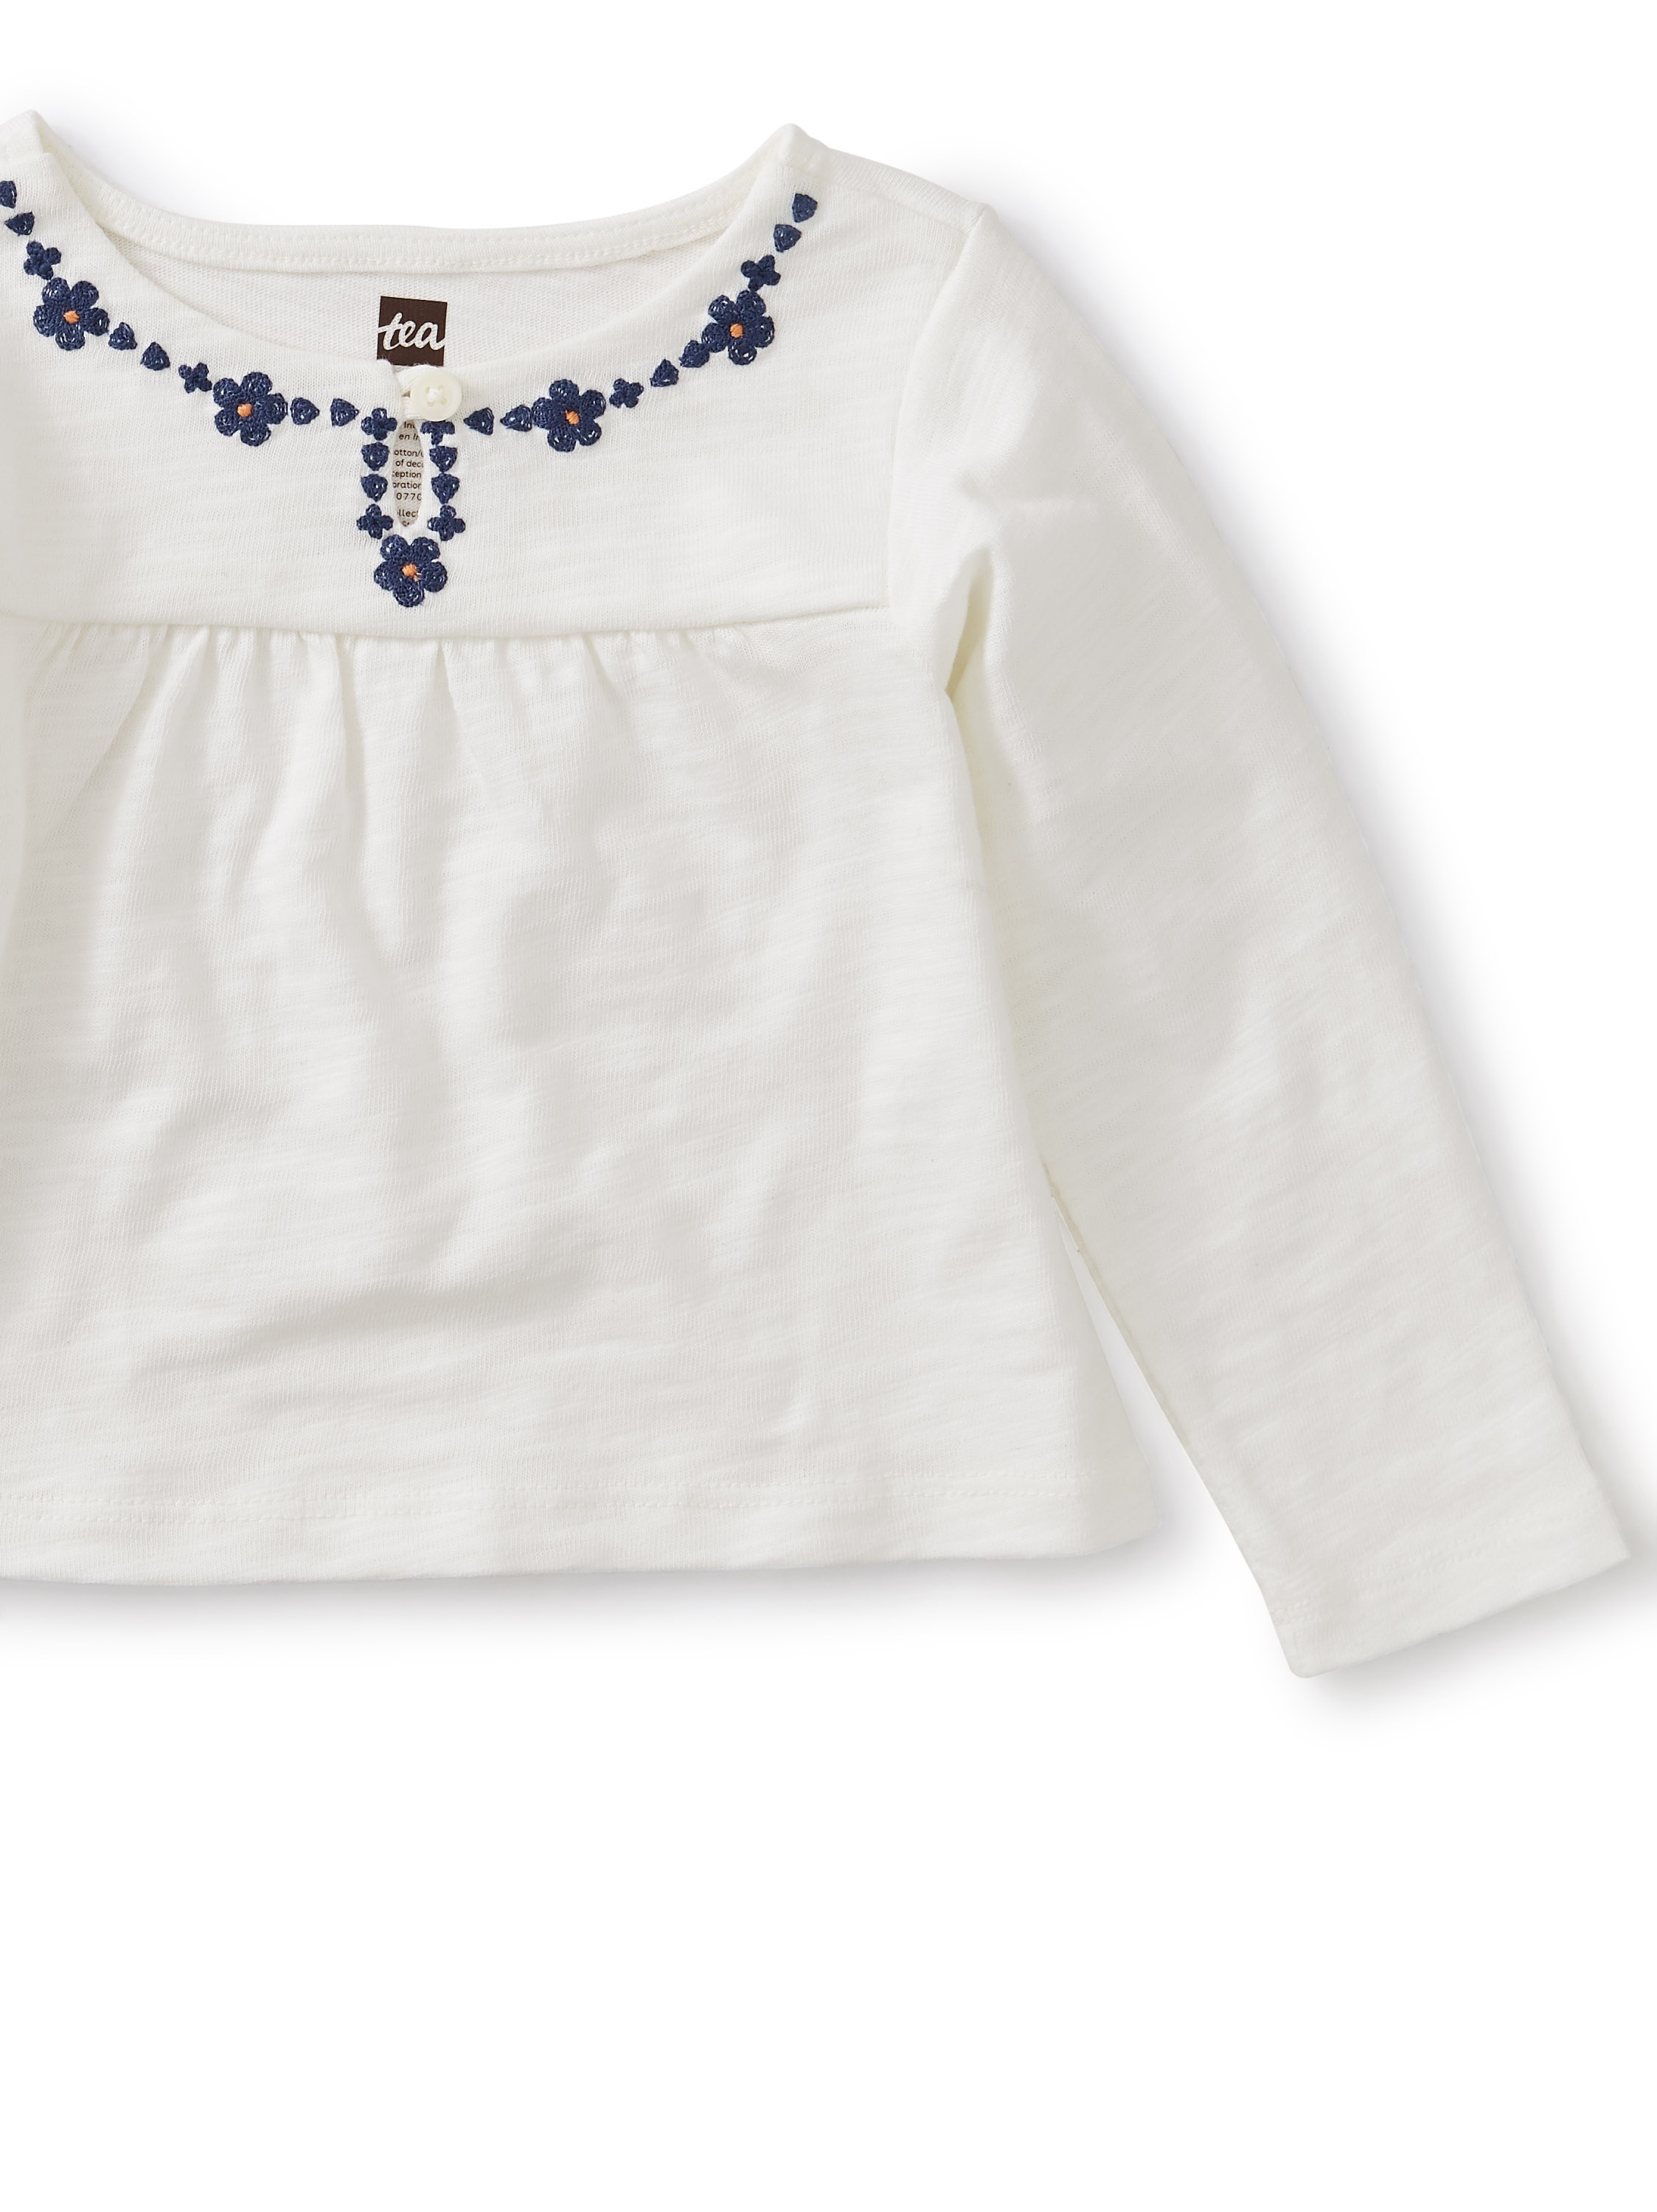 Embroidered Necklace Baby Top | Tea Collection